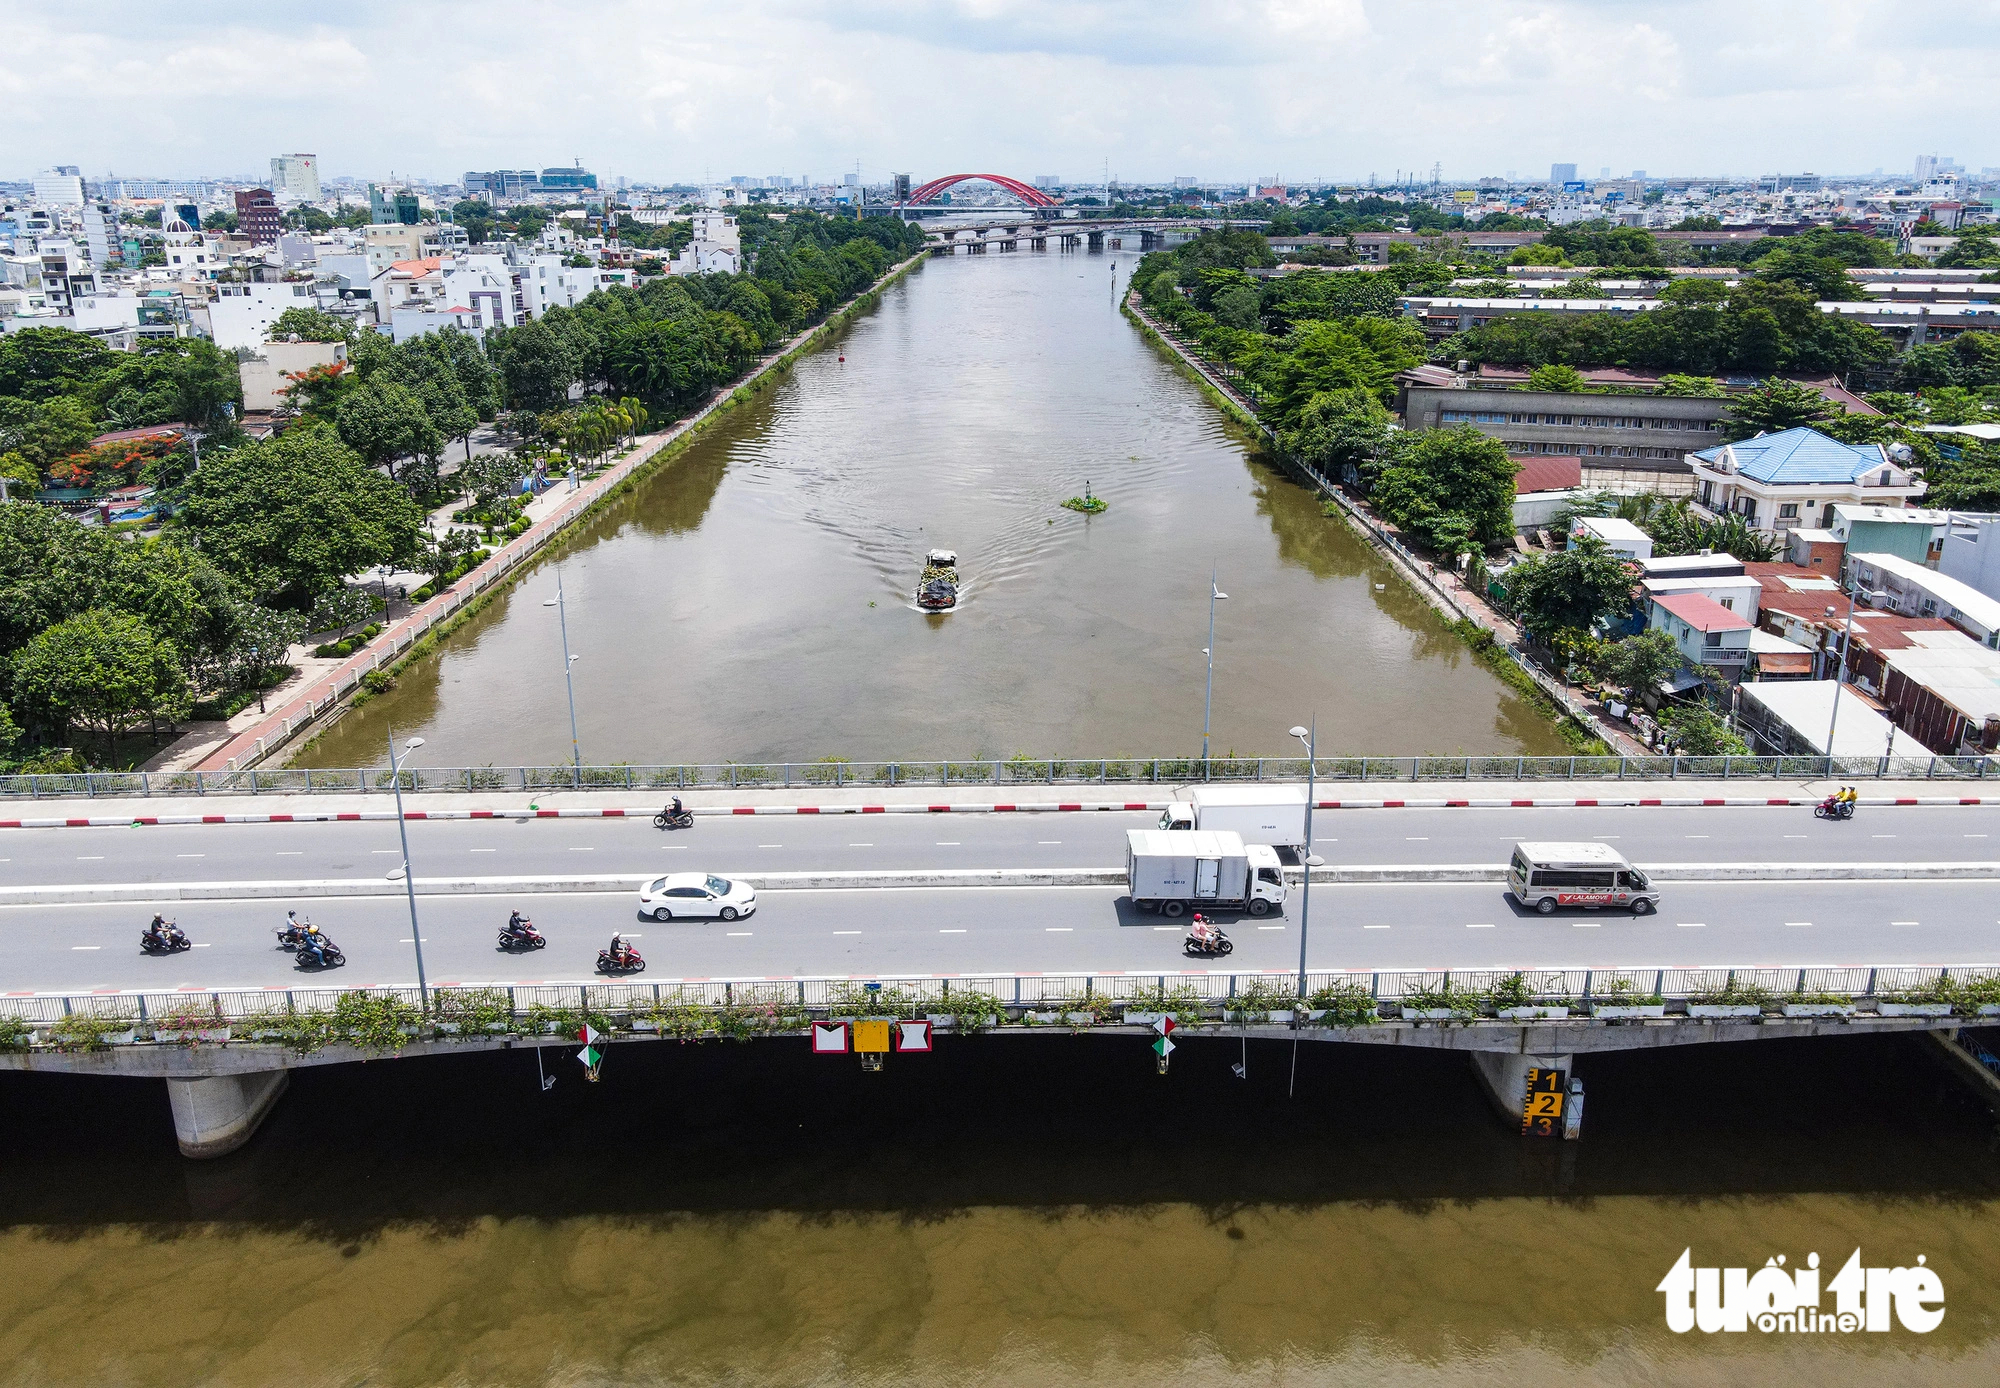 A bird's eye view of the Kinh Bridge in Binh Thanh District, Ho Chi Minh City. Photo: Tuoi Tre